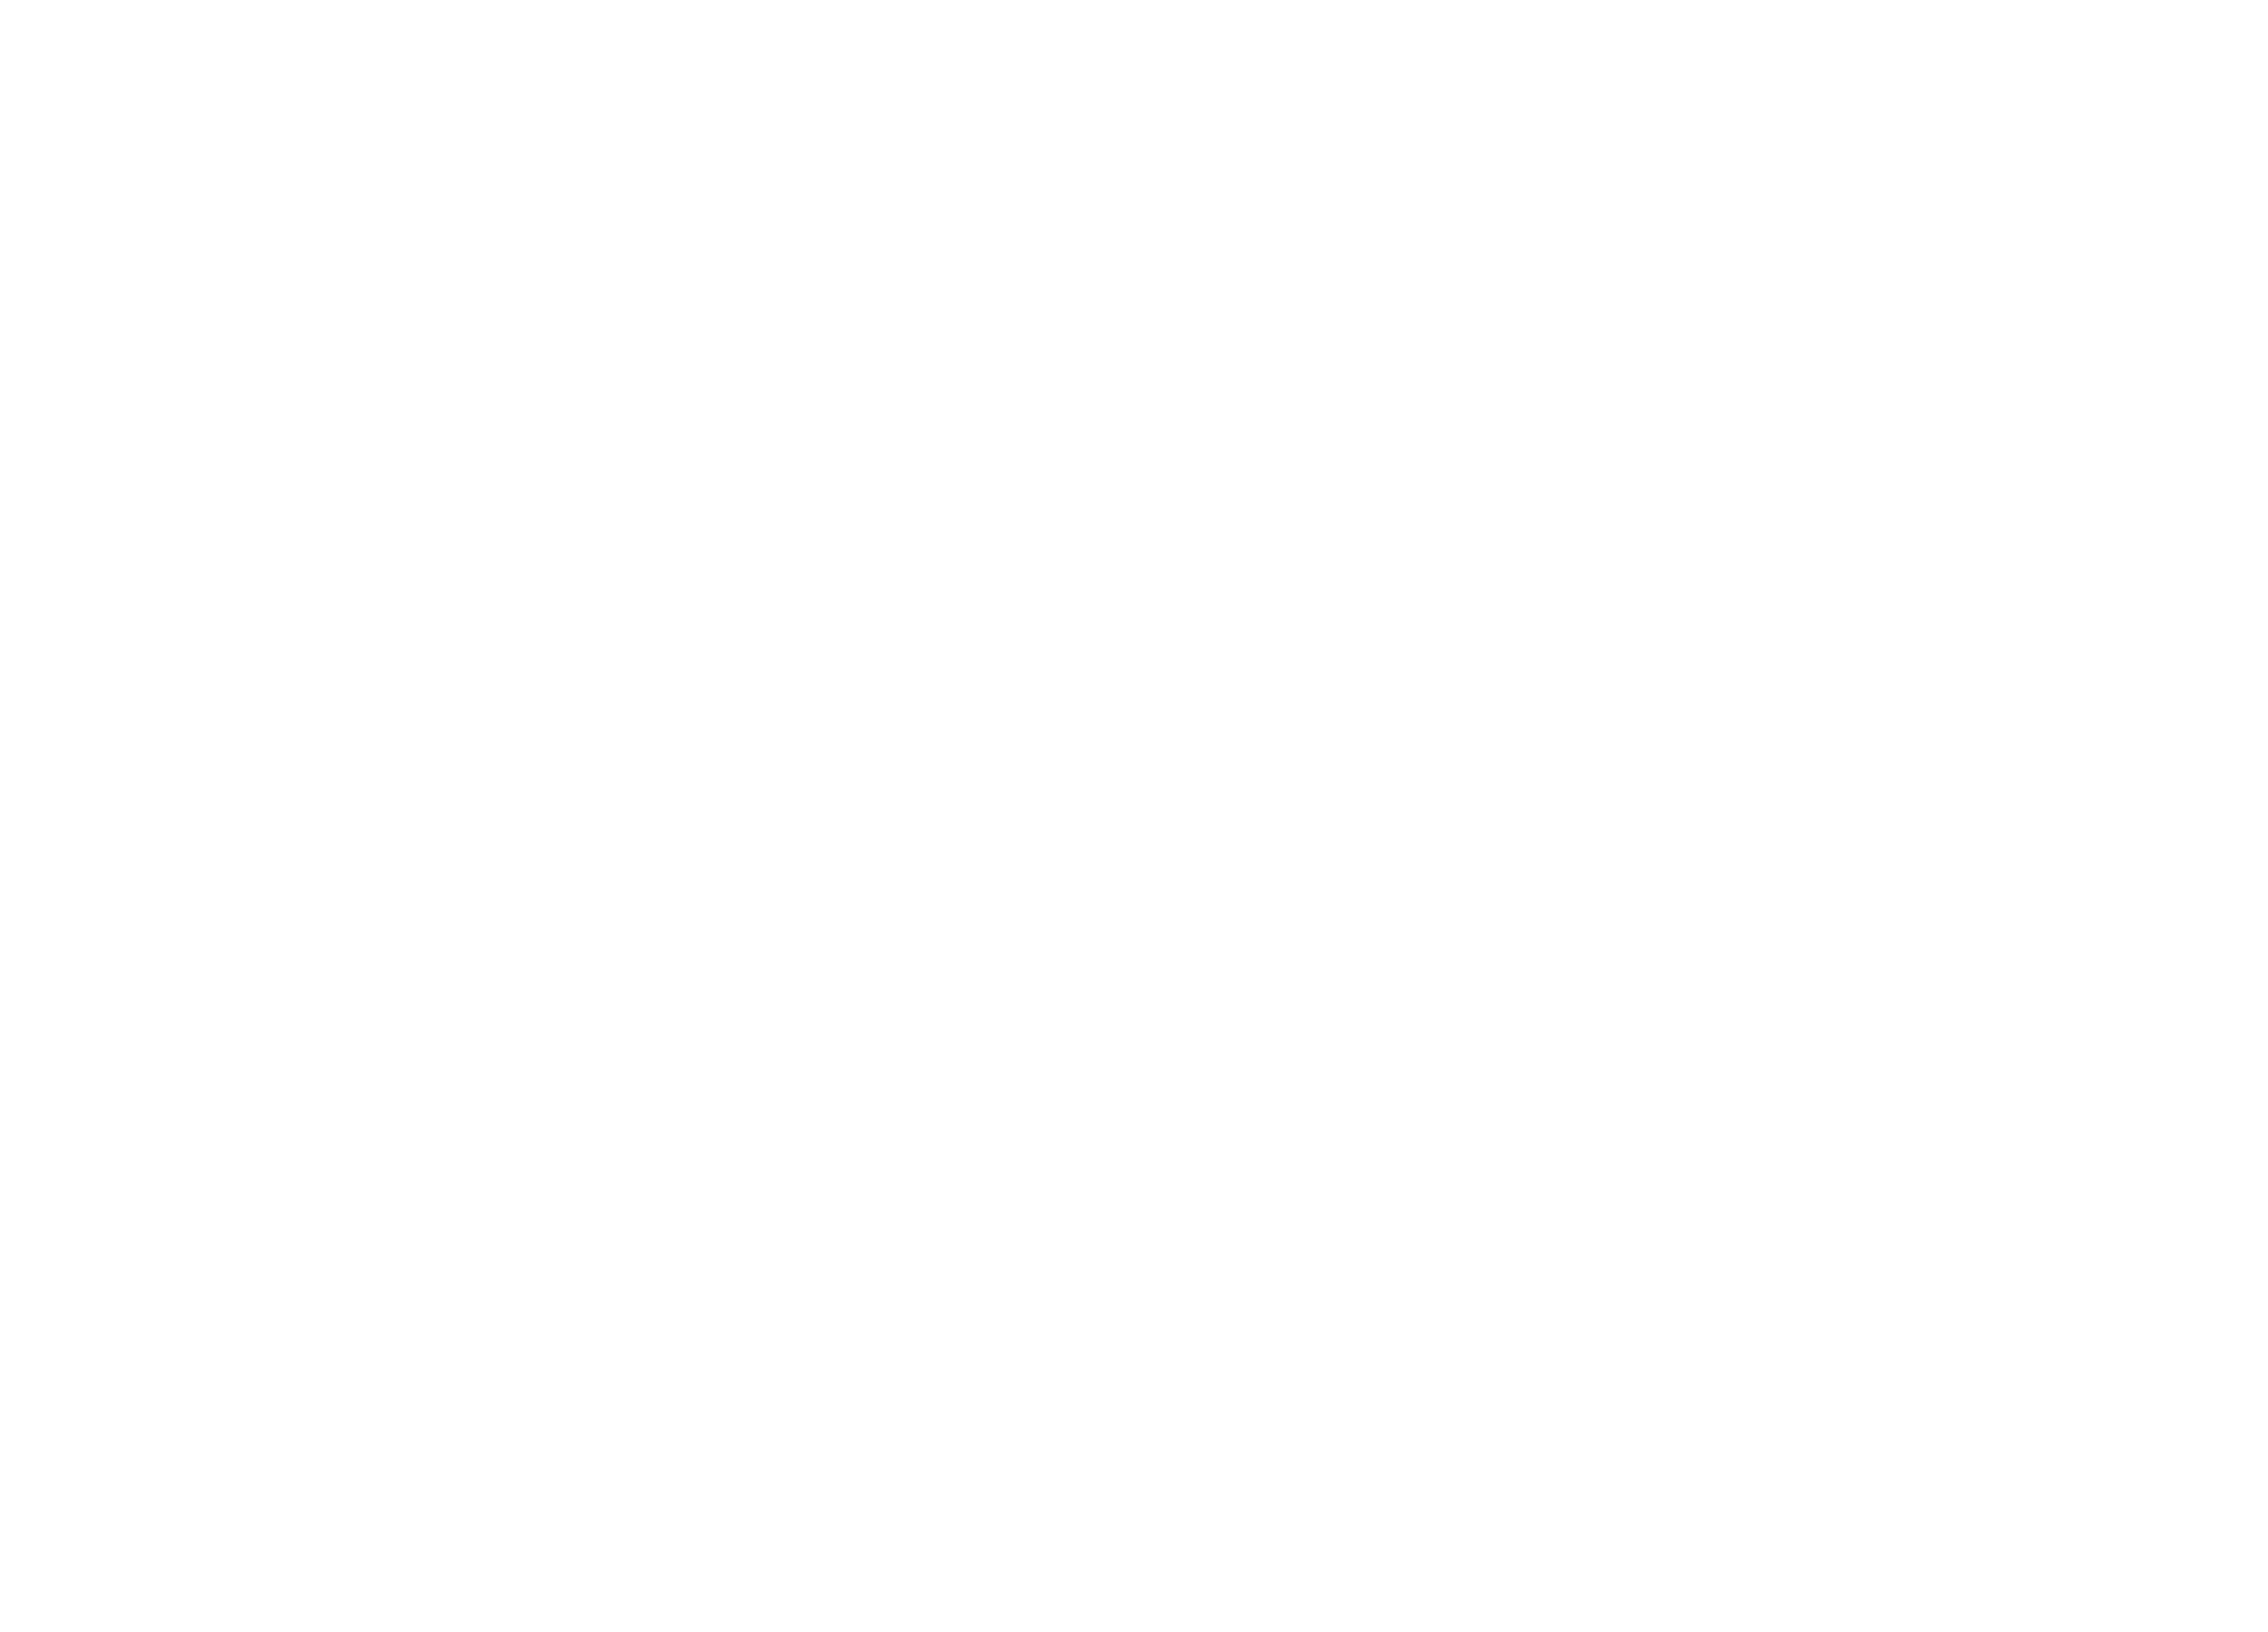 Yale: Respect New Haven